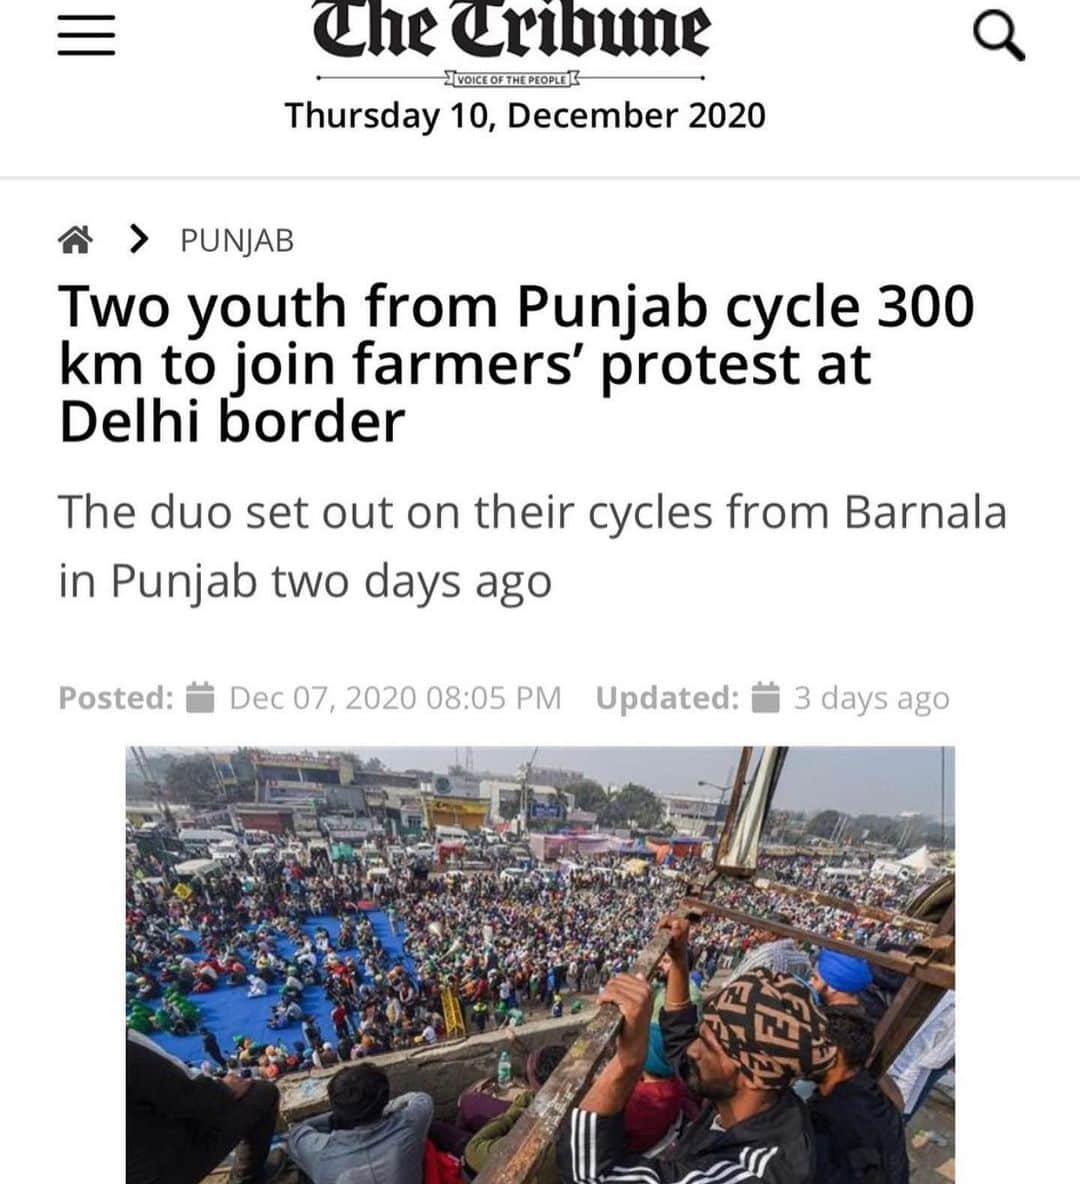 トームさんのインスタグラム写真 - (トームInstagram)「India Just Had the Biggest Protest in World History Will it make a difference?  By NITISH PAHWA DEC 09, 2020 @slate Protesters are pushed back by police. Protesters scuffle with police during a rally in support of the nationwide general strike called by farmers against the recent agricultural reforms in Allahabad, India, on Tuesday. . In late November, what may have been the single largest protest in human history took place in India, as tens of thousands of farmers marched to the capital to protest proposed new legislation and upward of 250 million people around the subcontinent participated in a 24-hour general strike in solidarity. This massive people’s movement has gained attention worldwide and, moreover, forced the government to come meet the protesters where they are instead of just cracking down and brutalizing them, a first in the six years of Prime Minister Narendra Modi’s rule.  To comprehend this moment, you have to understand the long plight of India’s farmers. To a much greater degree than other major economies, India retains its mass agrarian traditions alongside its developed industrial and tech sectors—agriculture is still the largest source of livelihood for most Indians, employing more than half the subcontinent’s workforce, mostly in small and local farms instead of agribusiness behemoths. Yet the farmers themselves, despite feeding so much of the nation and providing a significant bedrock for India’s economy, have always had a brutal time of it. Colonial-induced famines (temporarily solved by the reforms of the 1960s “Green Revolution,” which later would cause its own issues), bureaucratic and oppressive government policy, exploitation by feudal-minded landholders, and, of course, climate change have continually left India’s land workers among the worst off the world over. Even before the acceleration in mass despair augured by the pandemic and ensuing locust invasion, farmers had been left completely strapped by crippling debts, losses on marketed goods, and devastation from extreme weather; long-troubling suicide rates reached staggering new heights.」12月12日 7時41分 - tomenyc